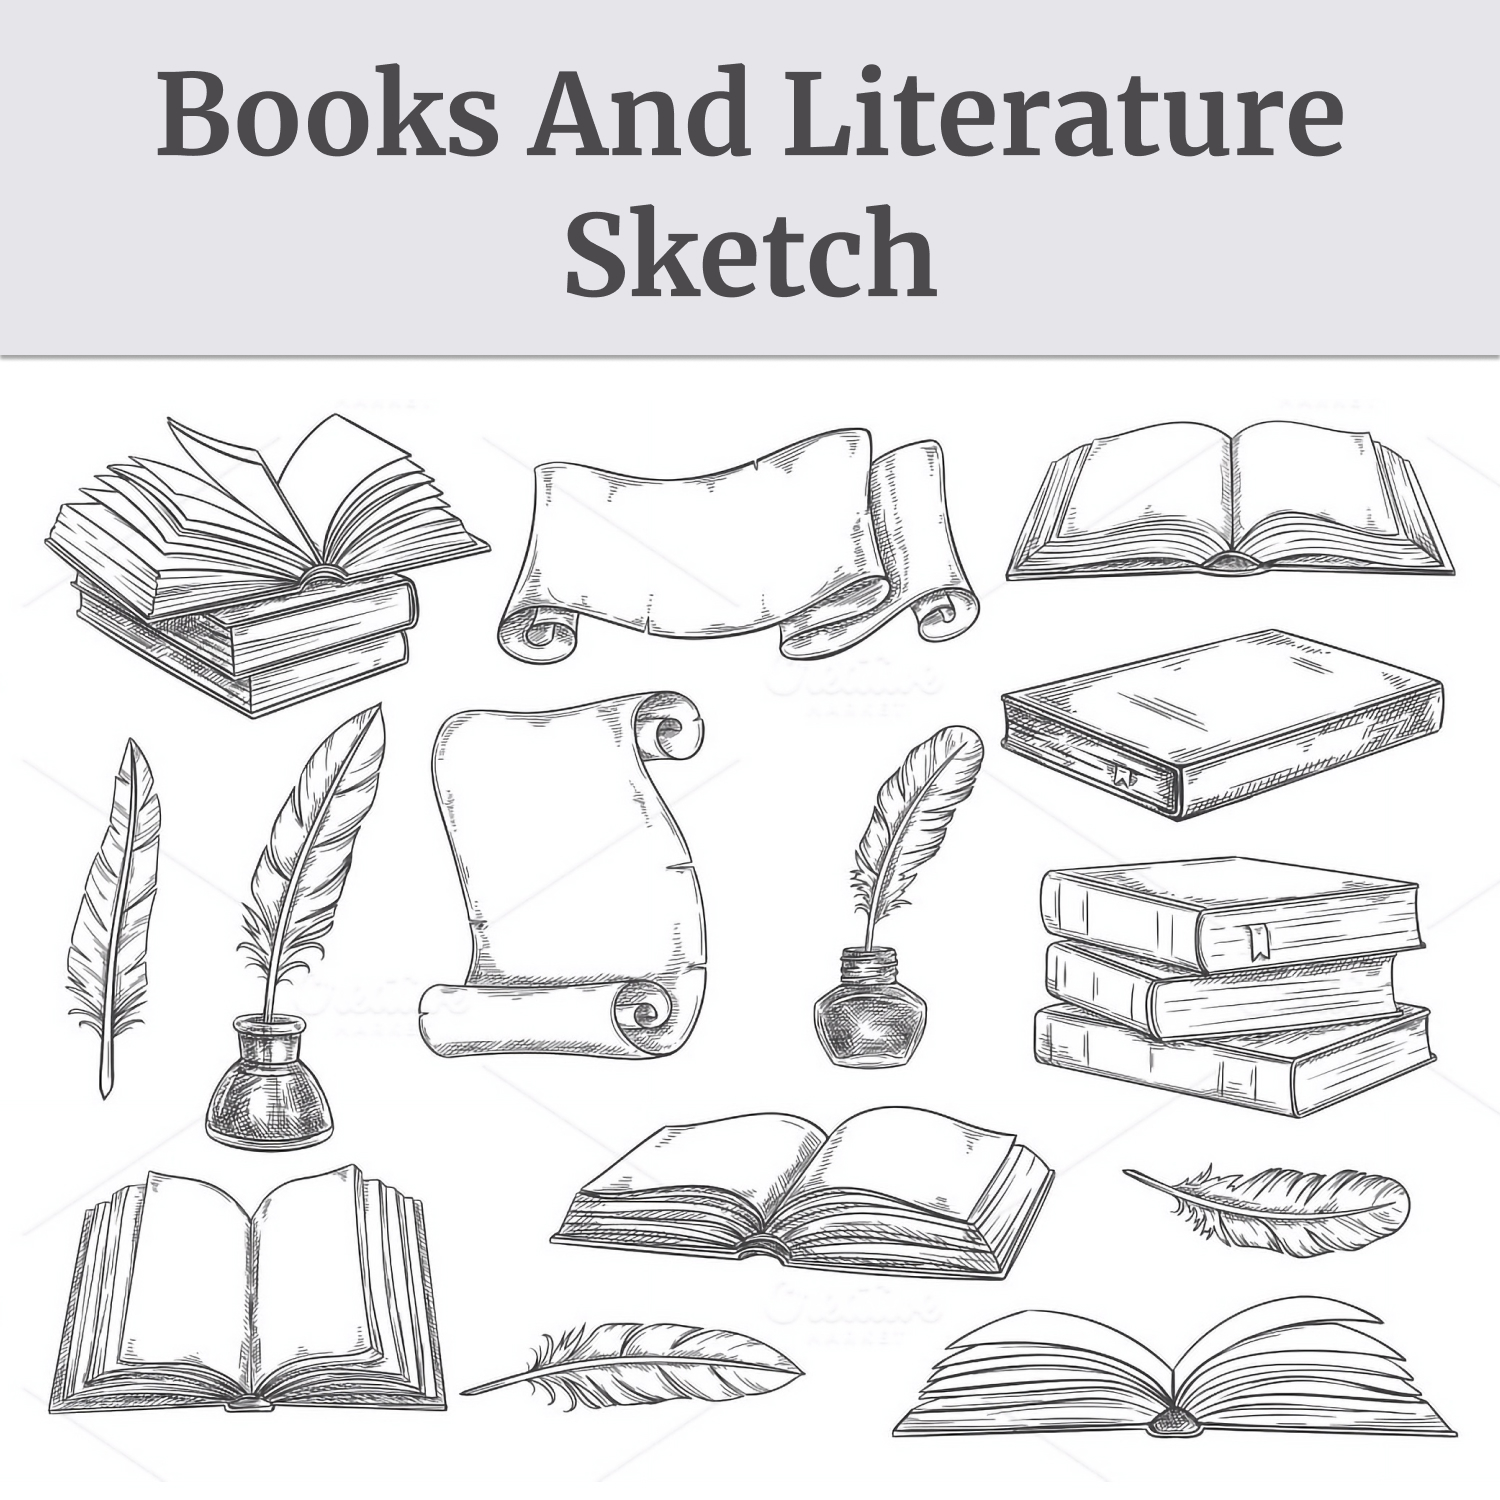 Images preview books and literature quills sketch.